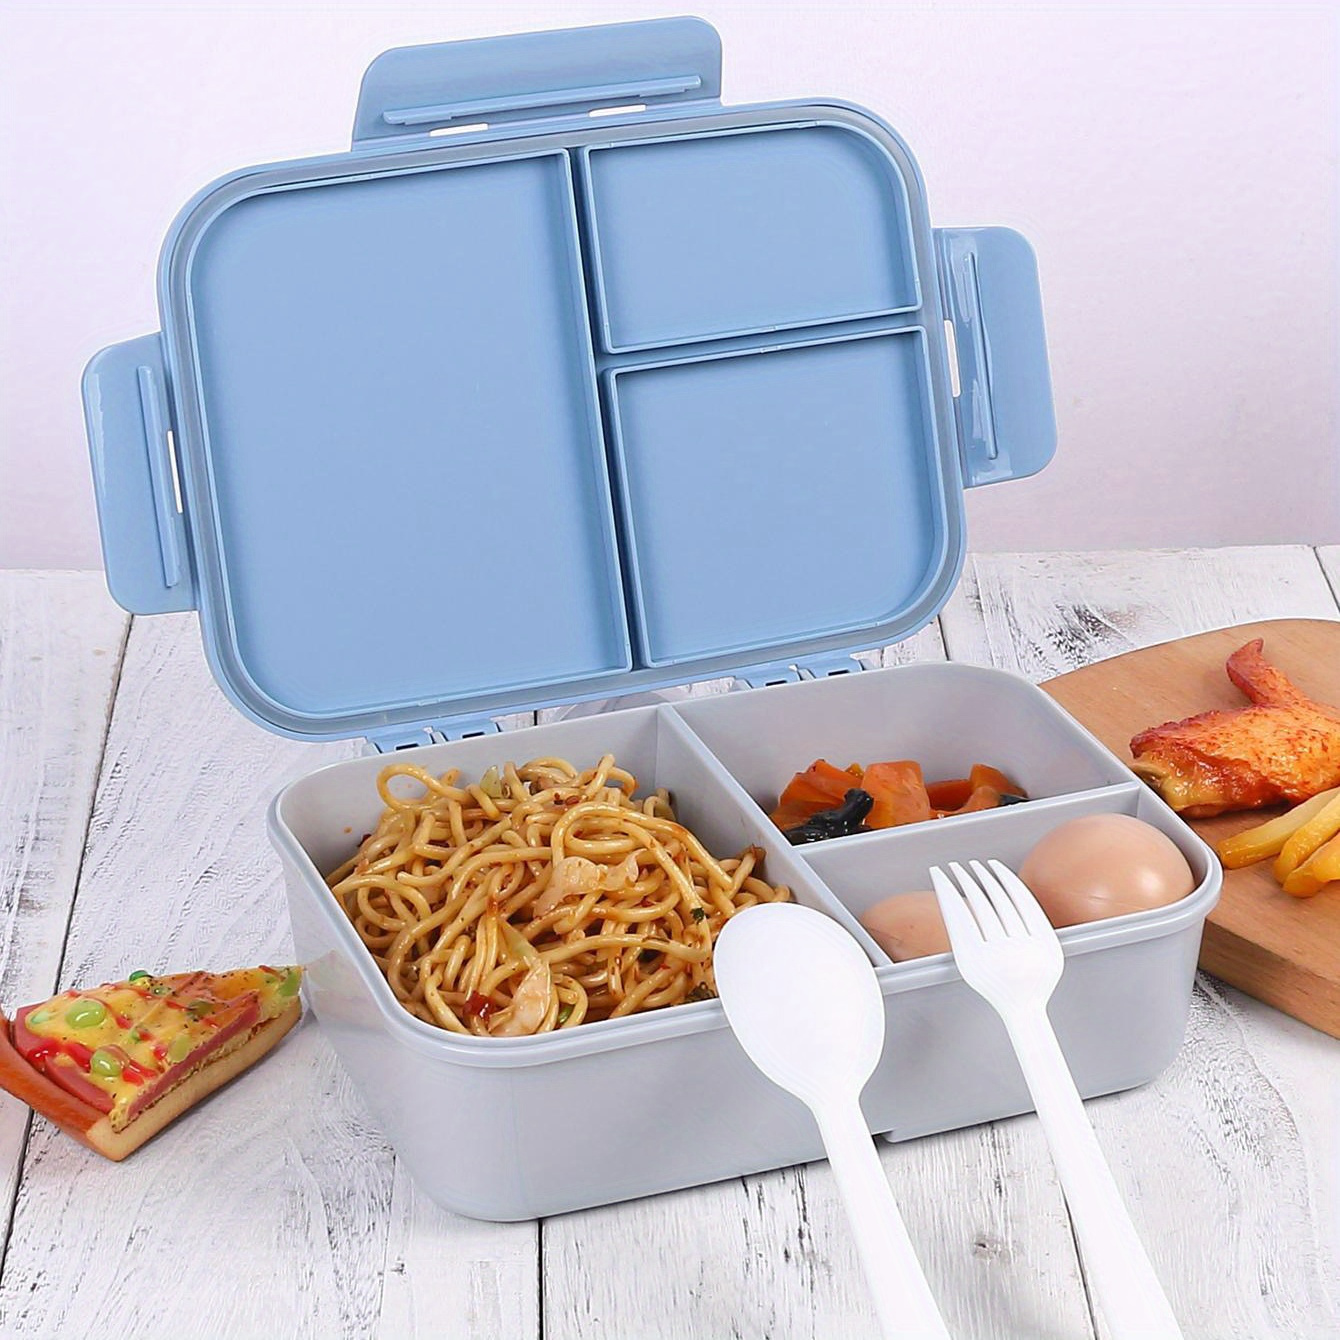 

1pc, Portable Flip Top Lunch Box With Tableware, Large Capacity Food Grade Plastic Lunch Box, Sealed Container For Travel Food, Very Suitable For Camping, Picnics, And Office Dining